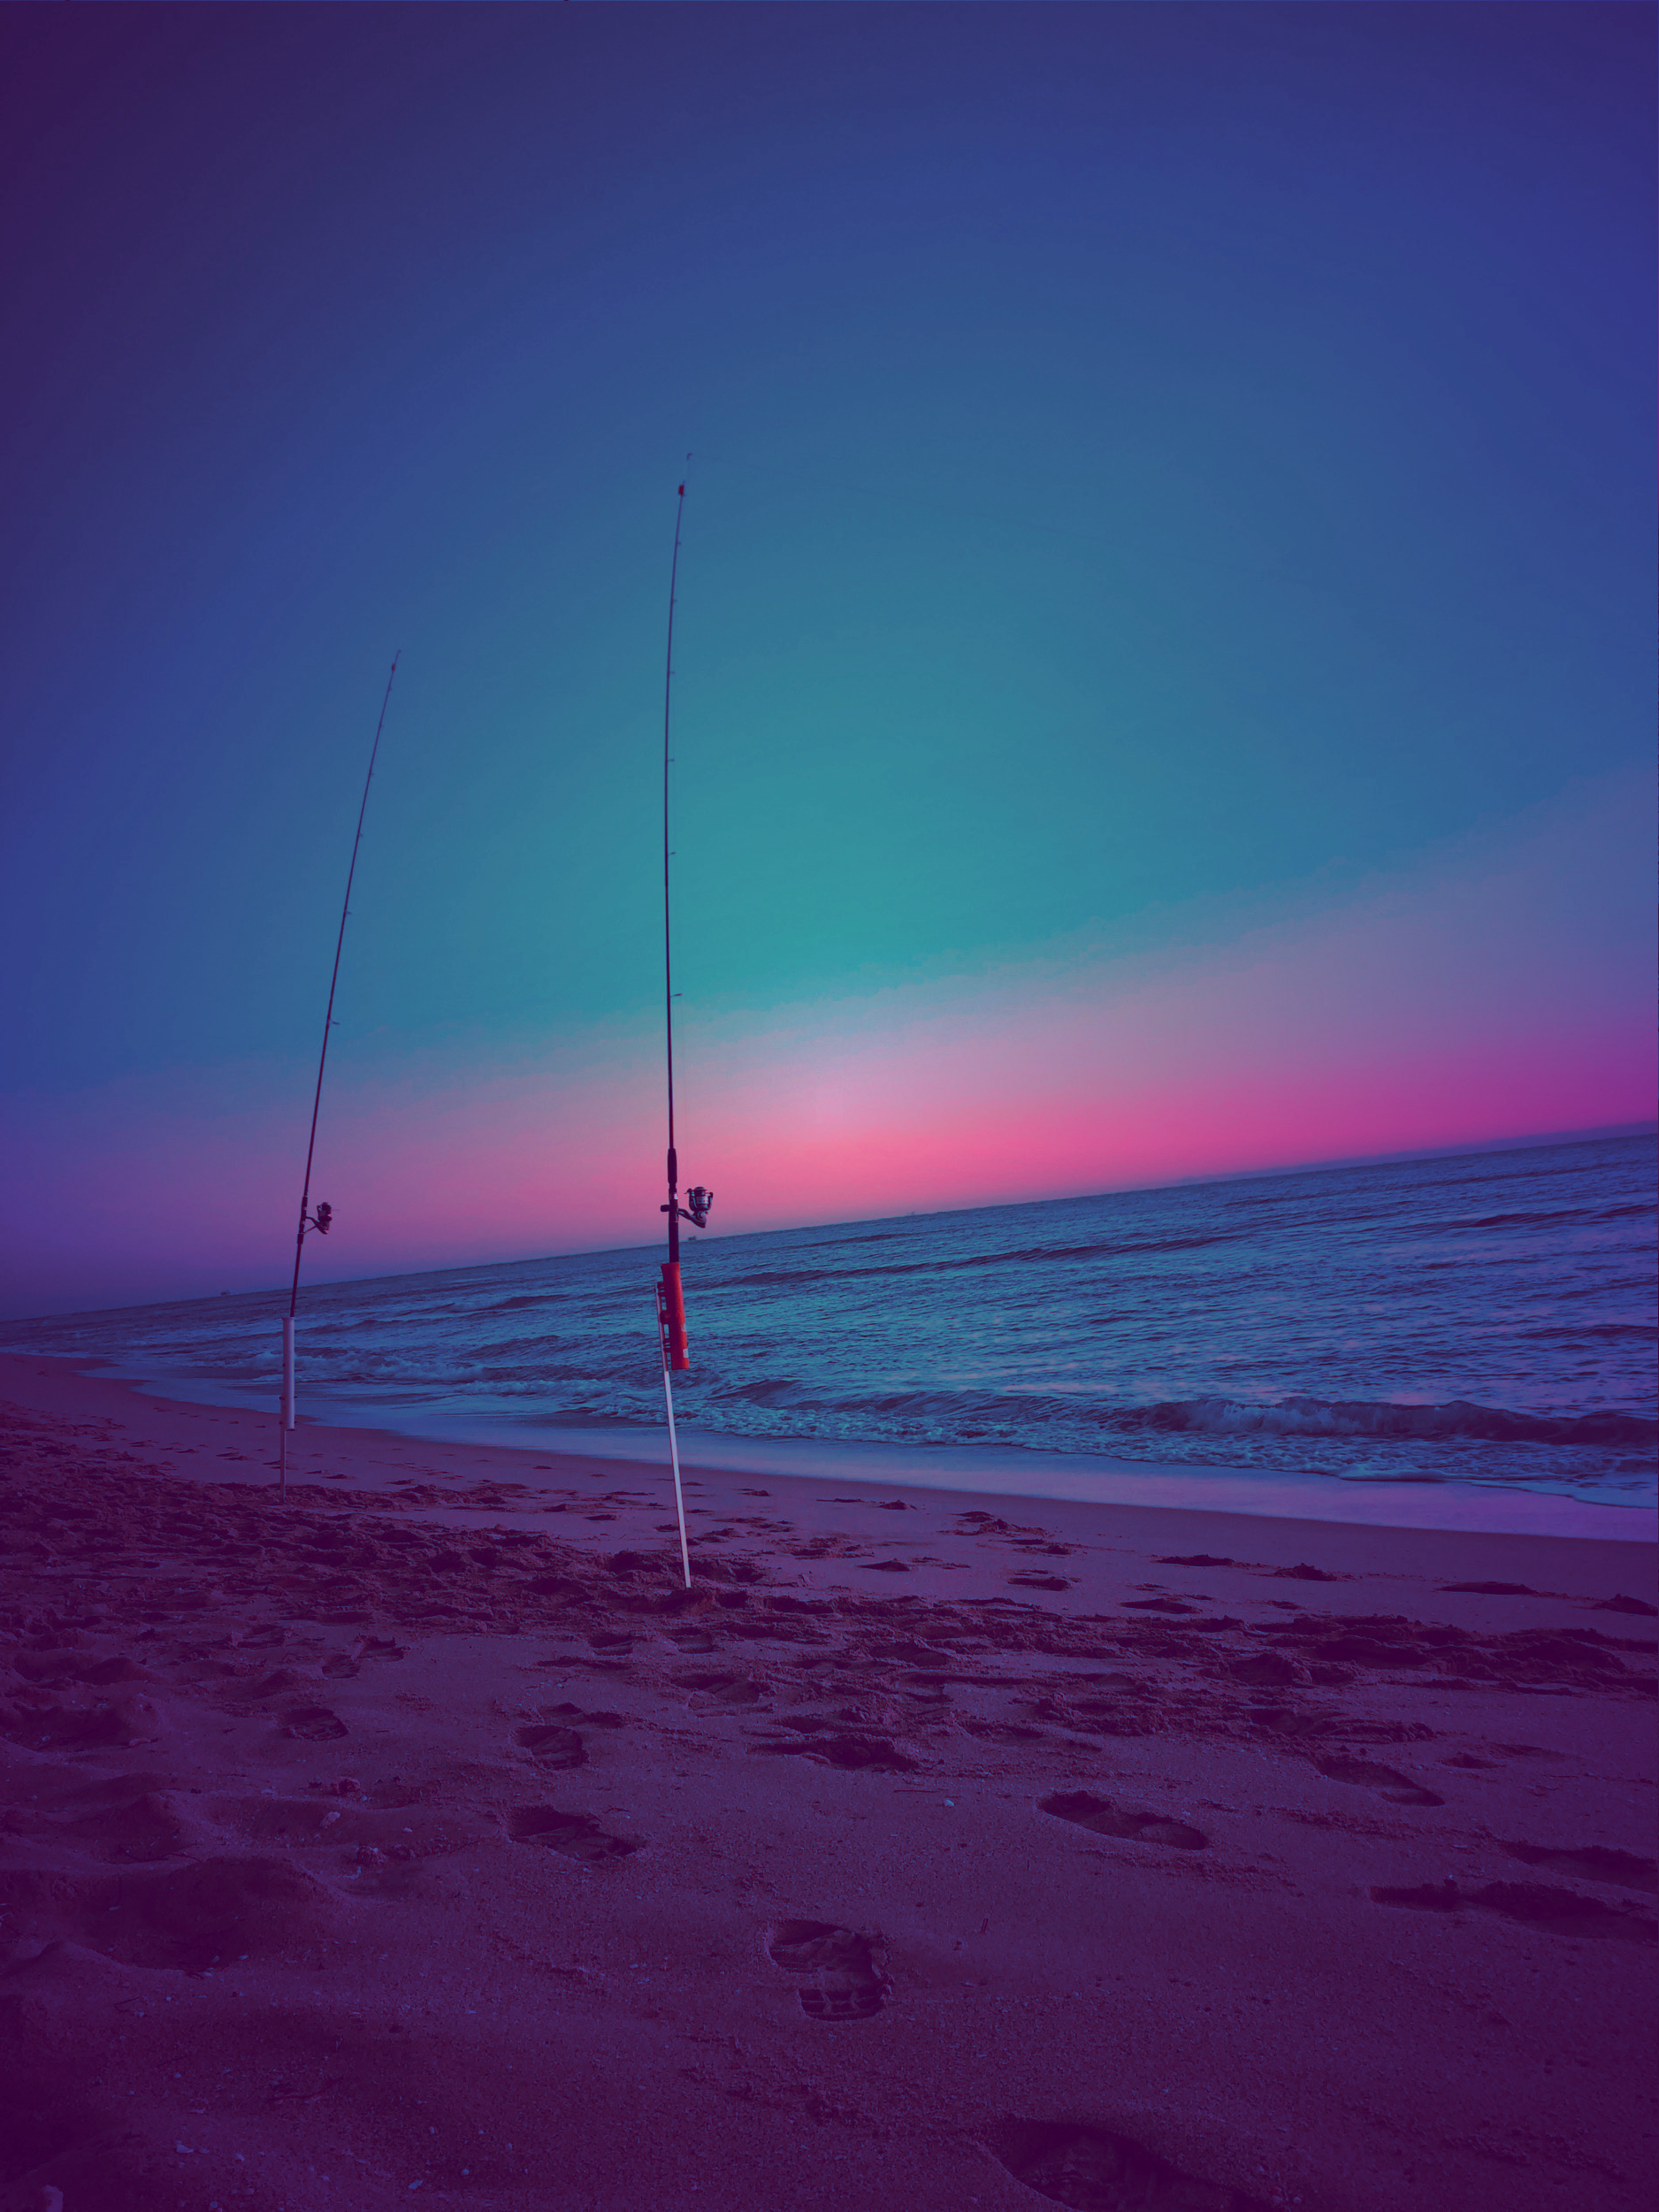 Fishing roads set up on a vacant beach at sunrise.